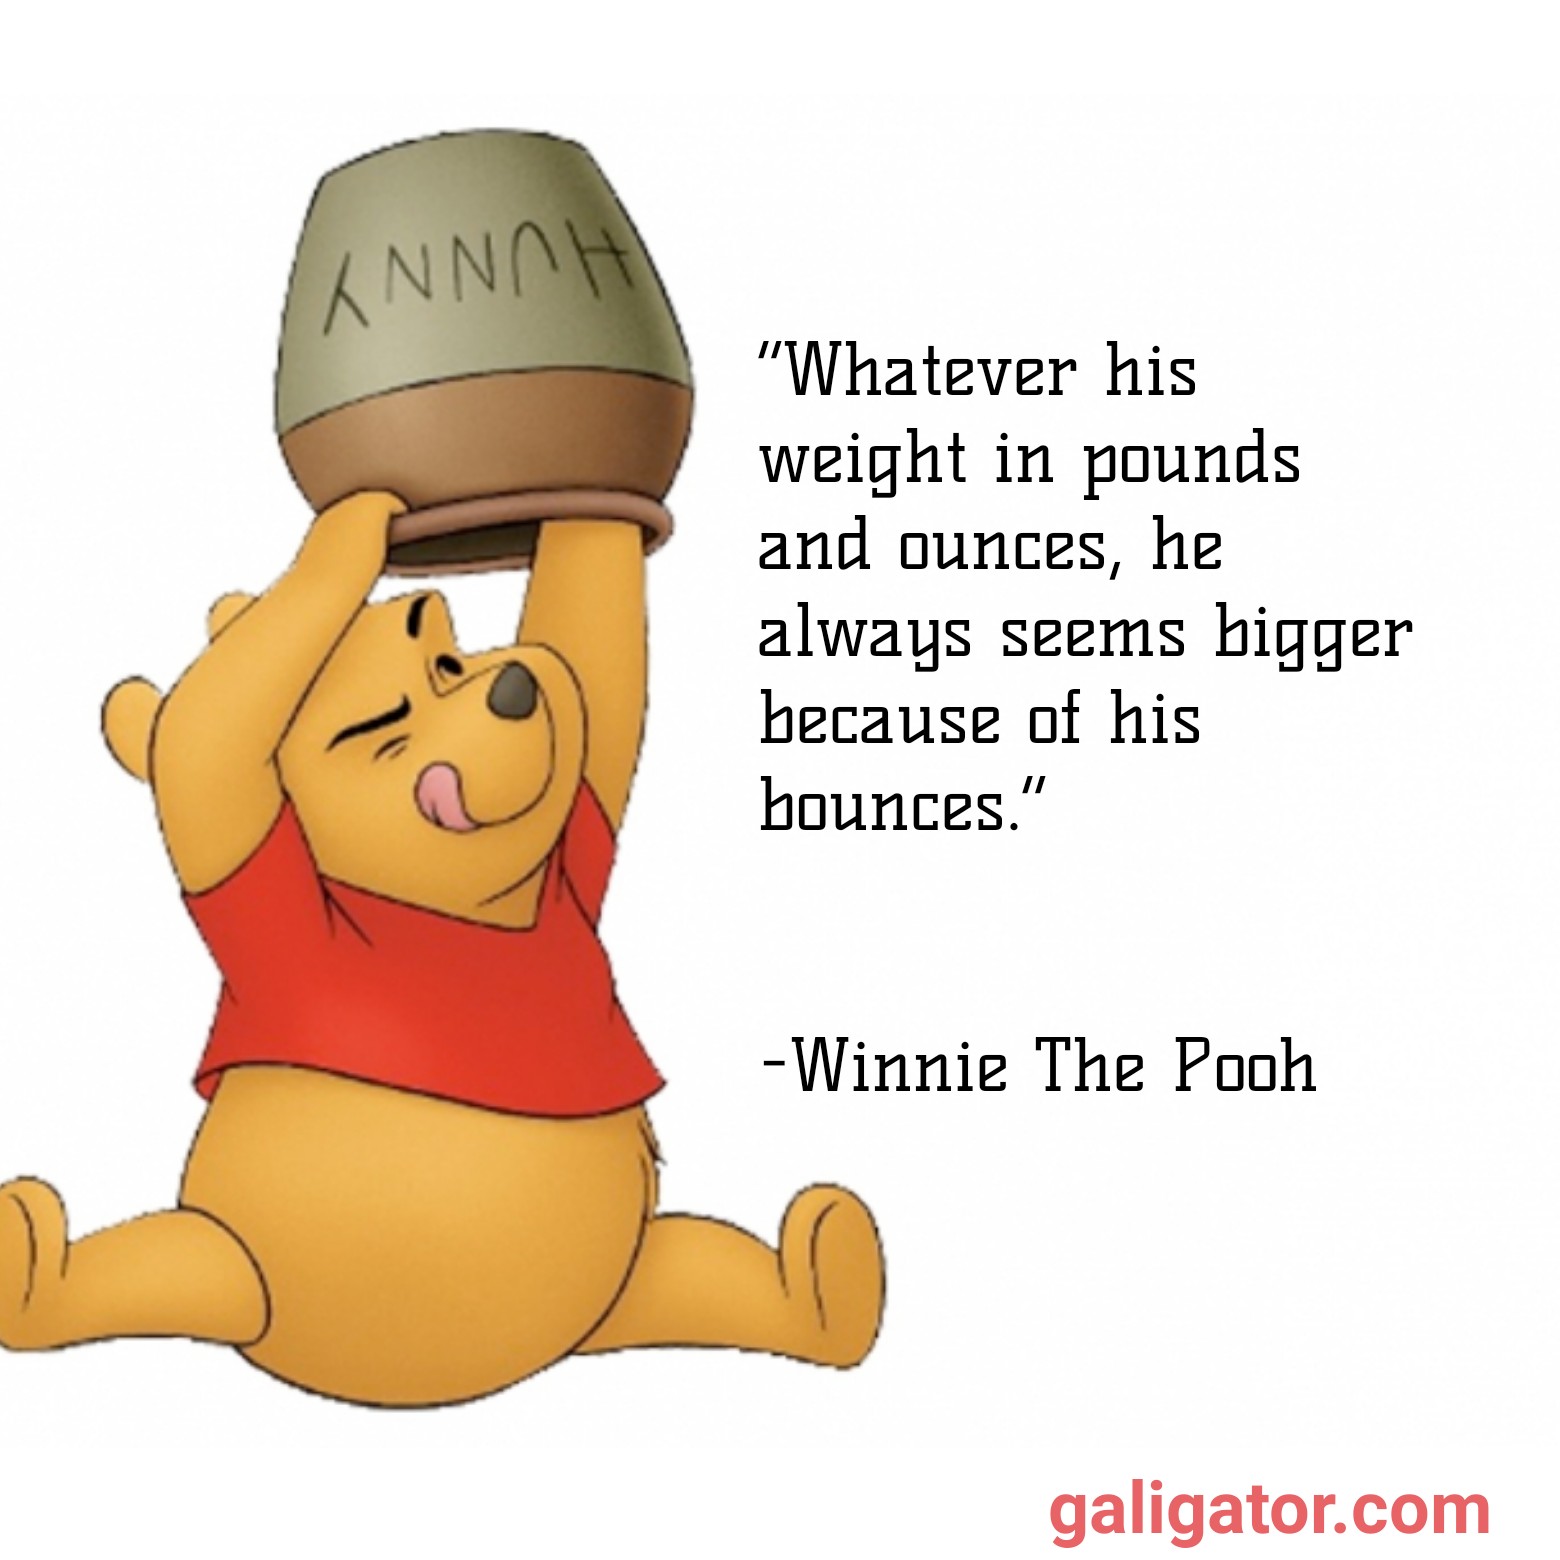 winnie the pooh quotes, winnie the pooh friendship quotes , winnie the pooh love quotes , inspirational winnie the pooh quotes , winnie the pooh birthday quotes , winnie the pooh blustery day quote,  winnie the pooh birthday quotes, winnie the pooh quotes funny, winnie the pooh graduation quotes, winnie the pooh quotes they say nothing is impossible